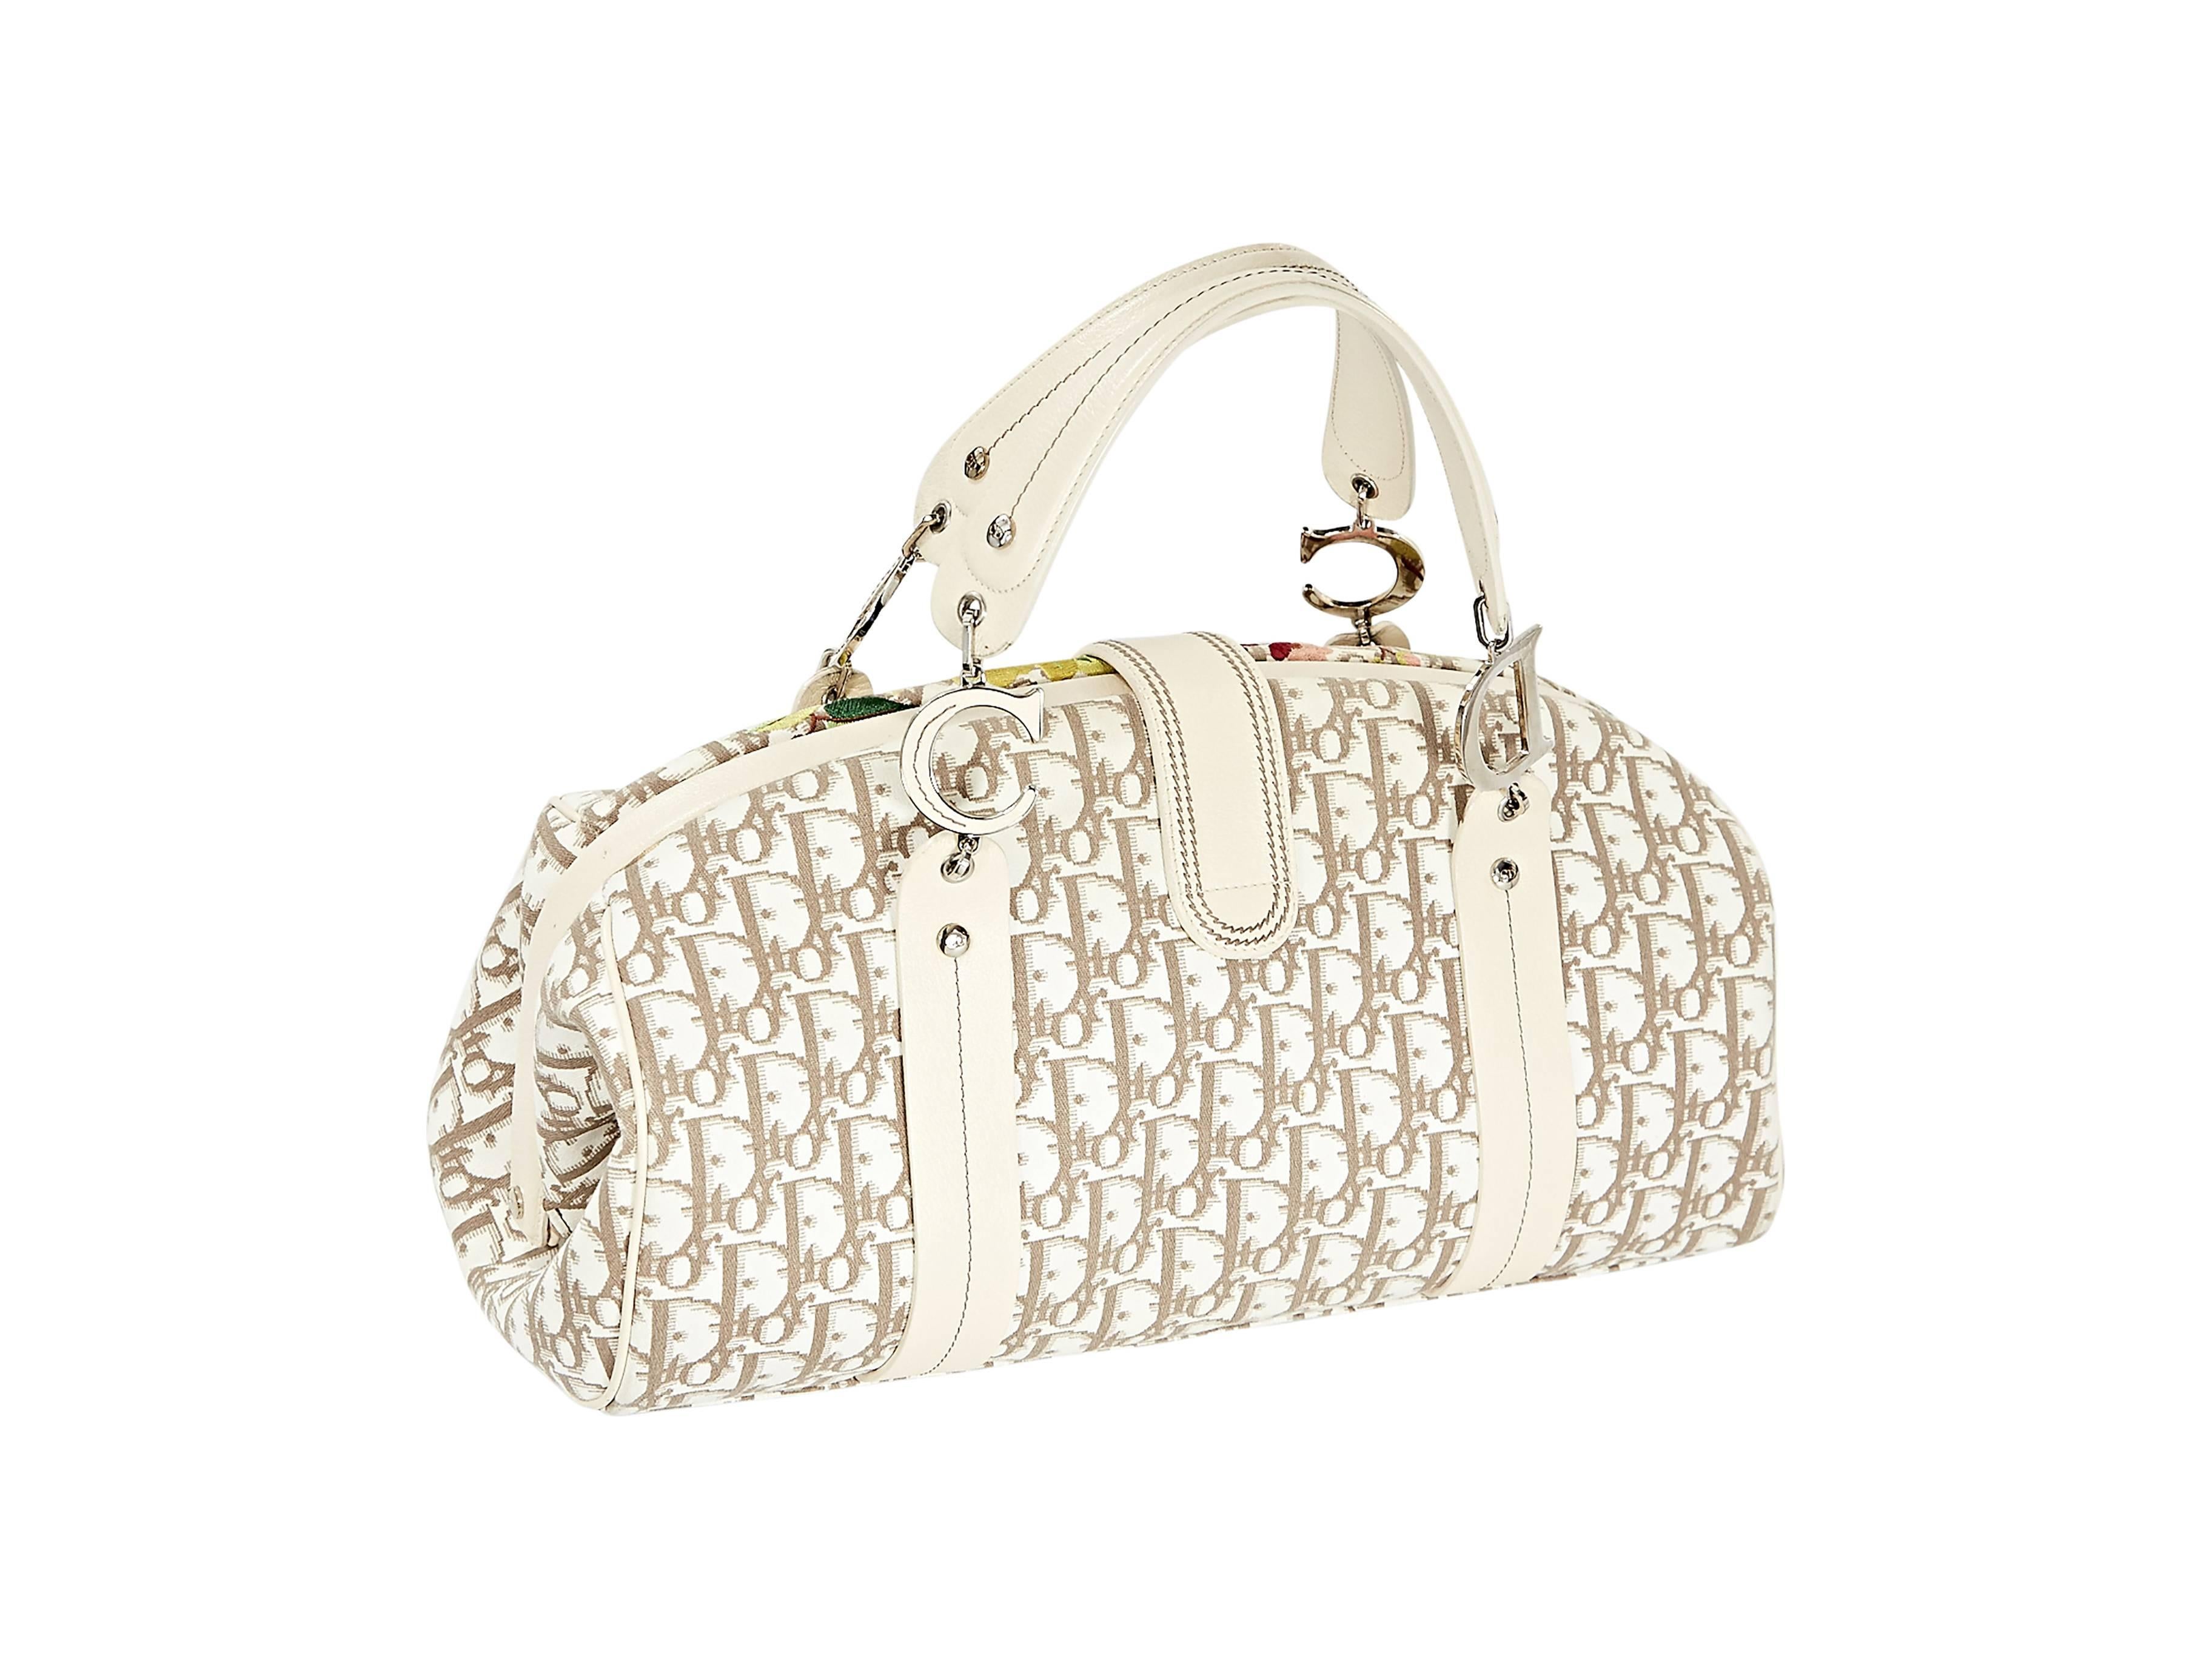 Brown and white monogram bag by Christian Dior.  Accented with multicolor floral embroidery. Top buckle strap closure.  Lined interior with zip and slide pockets.  Protective metal feet.  Silvertone hardware.  